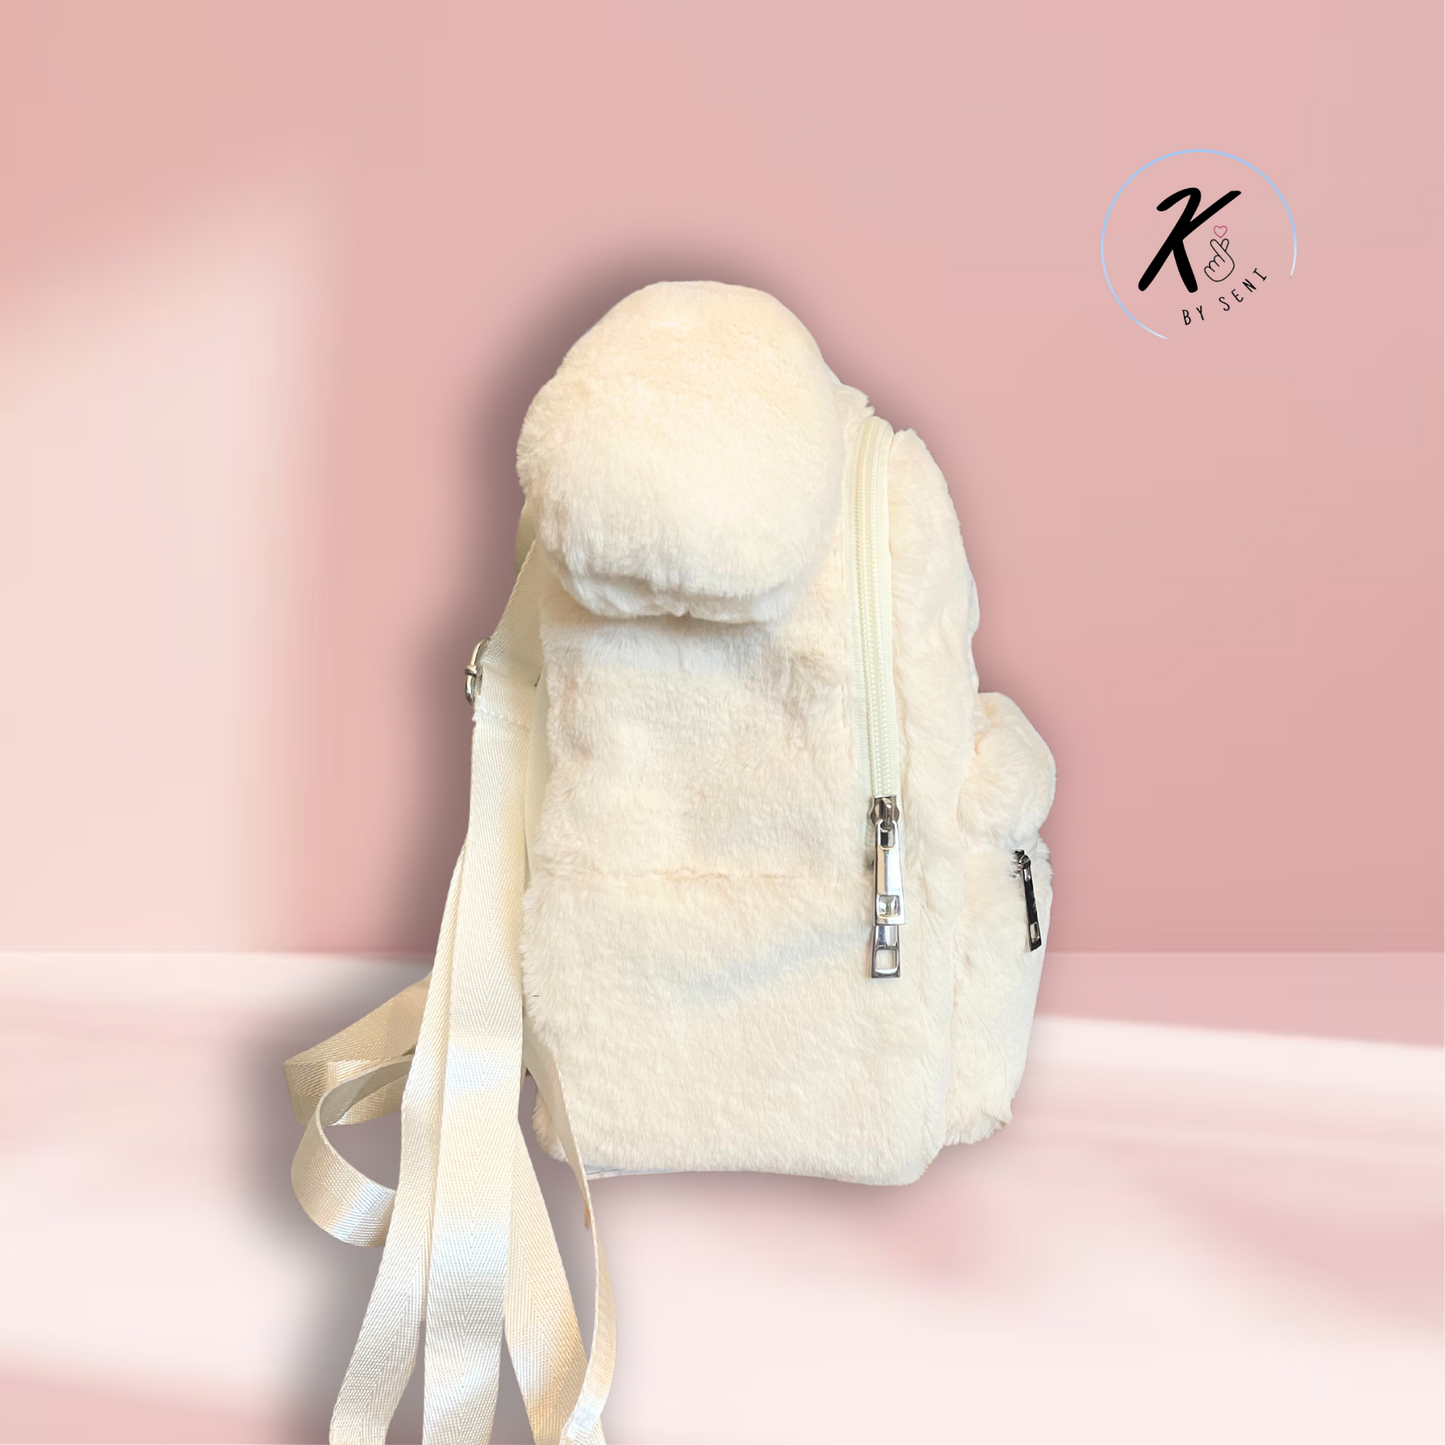 PuppyM Skzoo-inspired Backpack